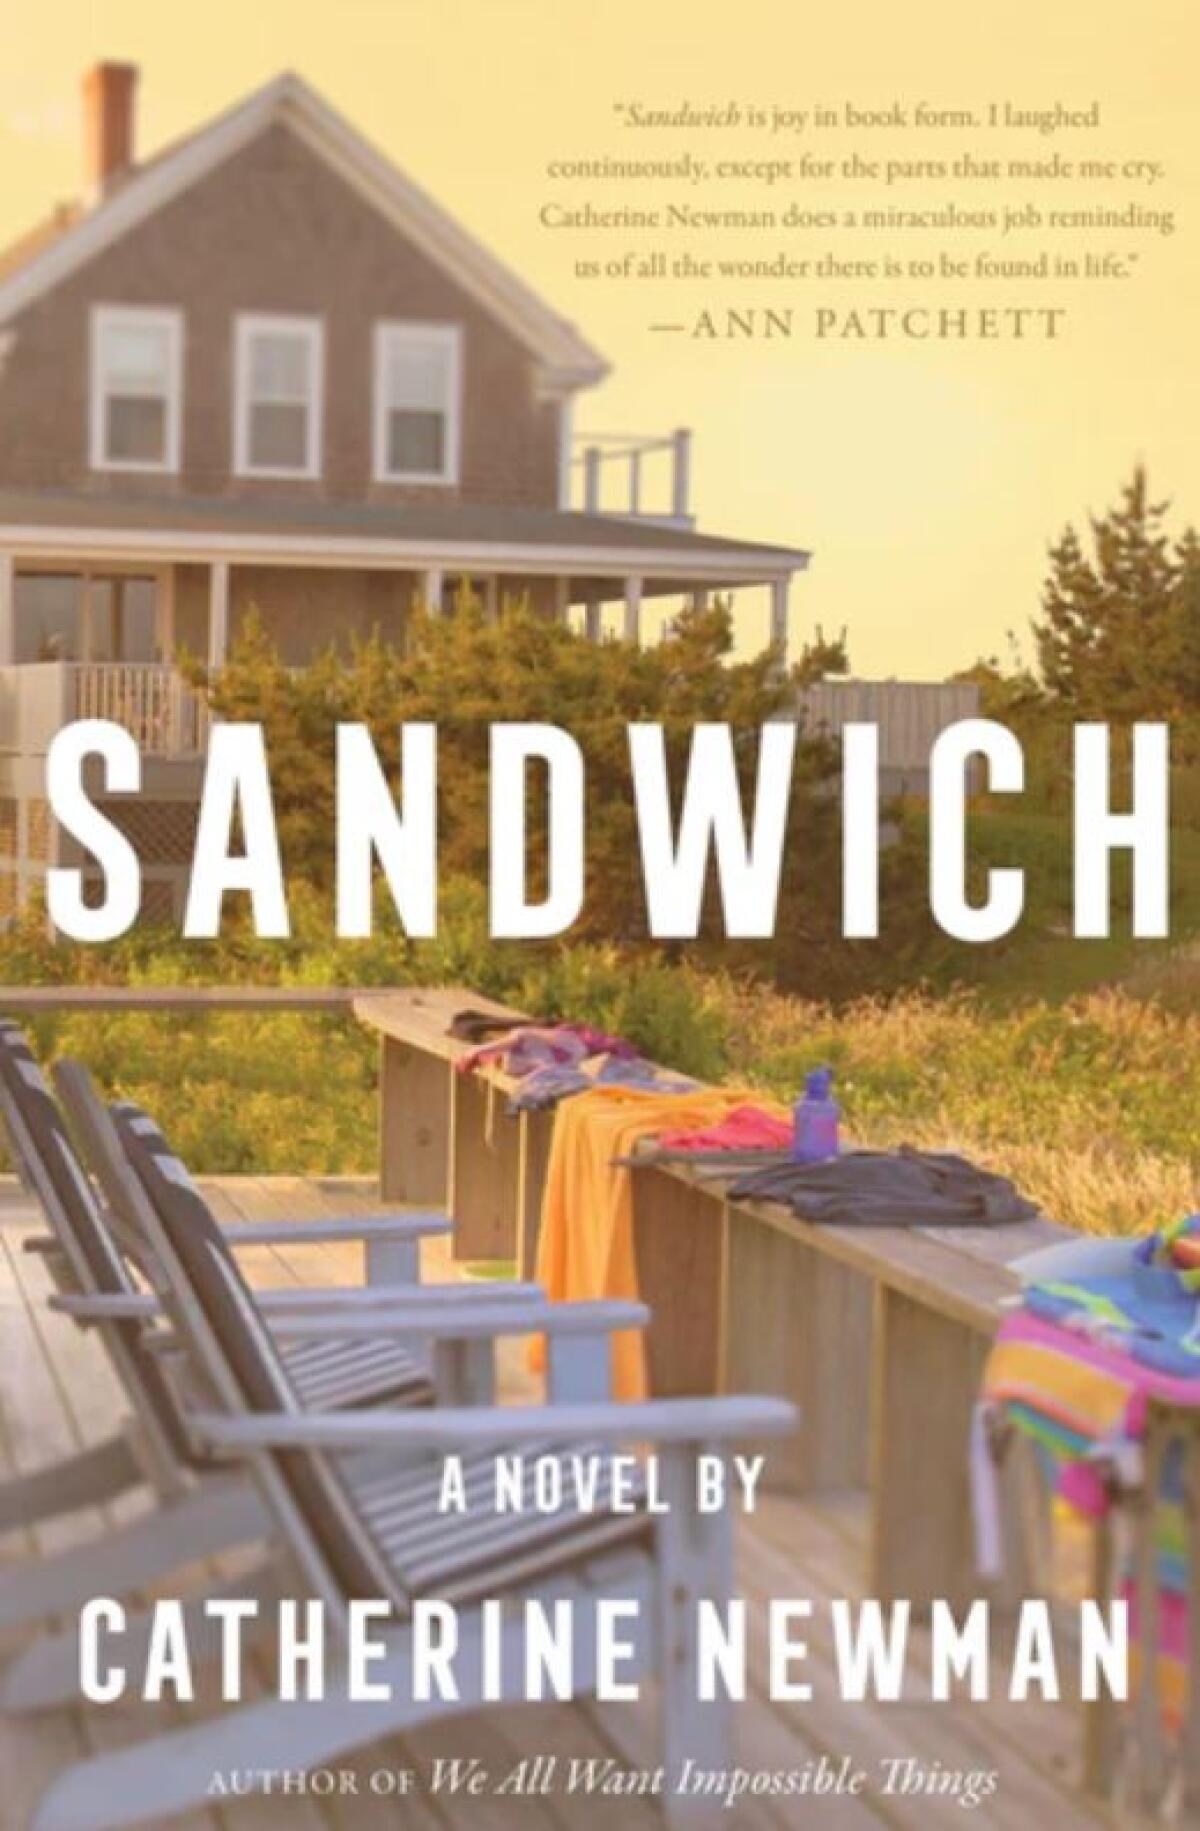 The cover of "Sandwich"